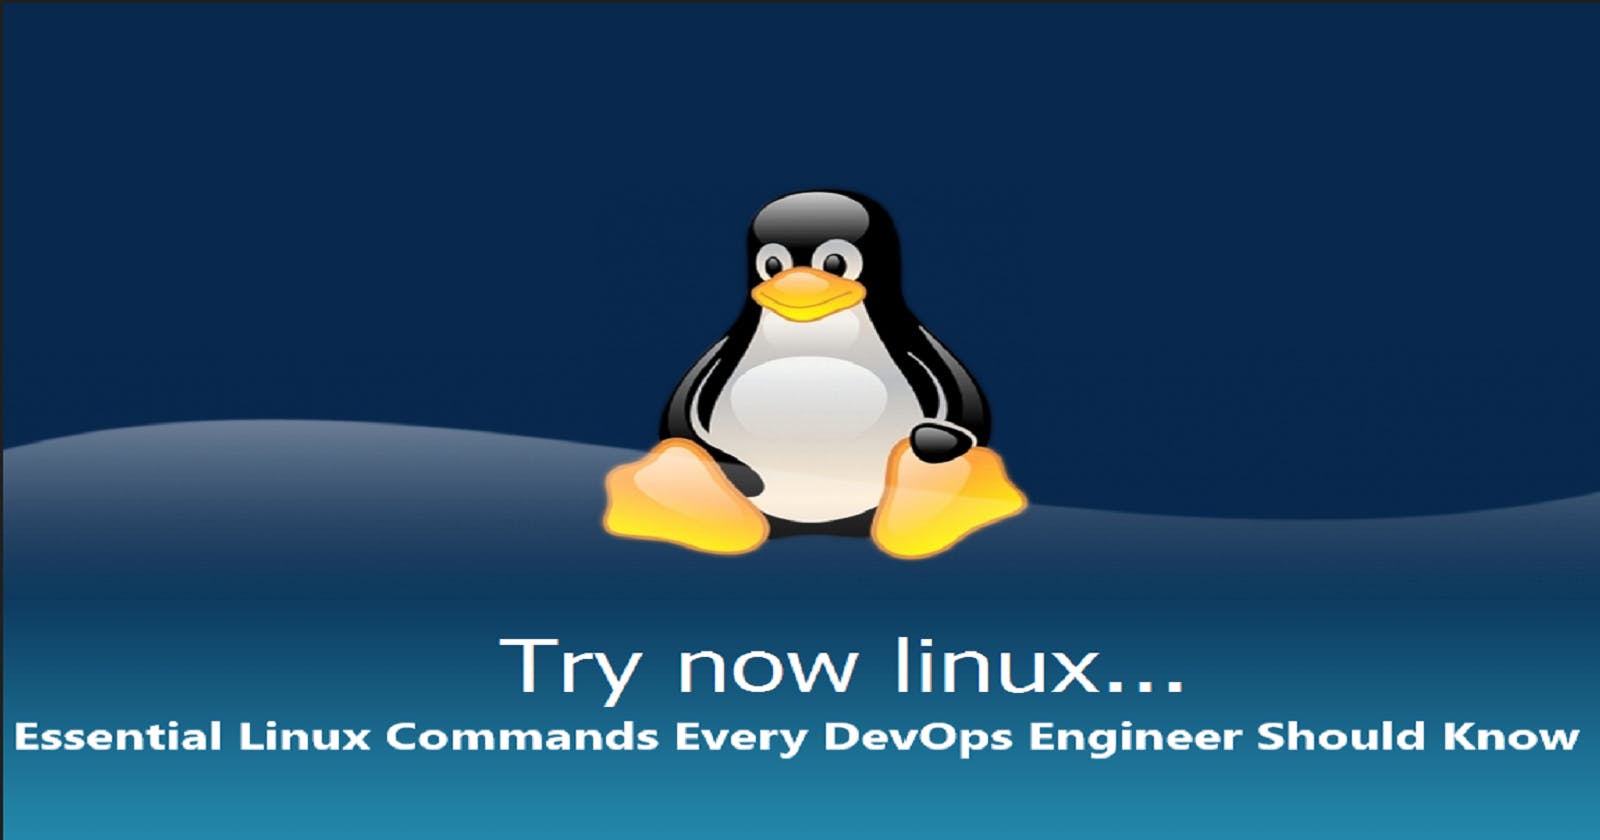 Essential Linux Commands Every DevOps Engineer Should Know